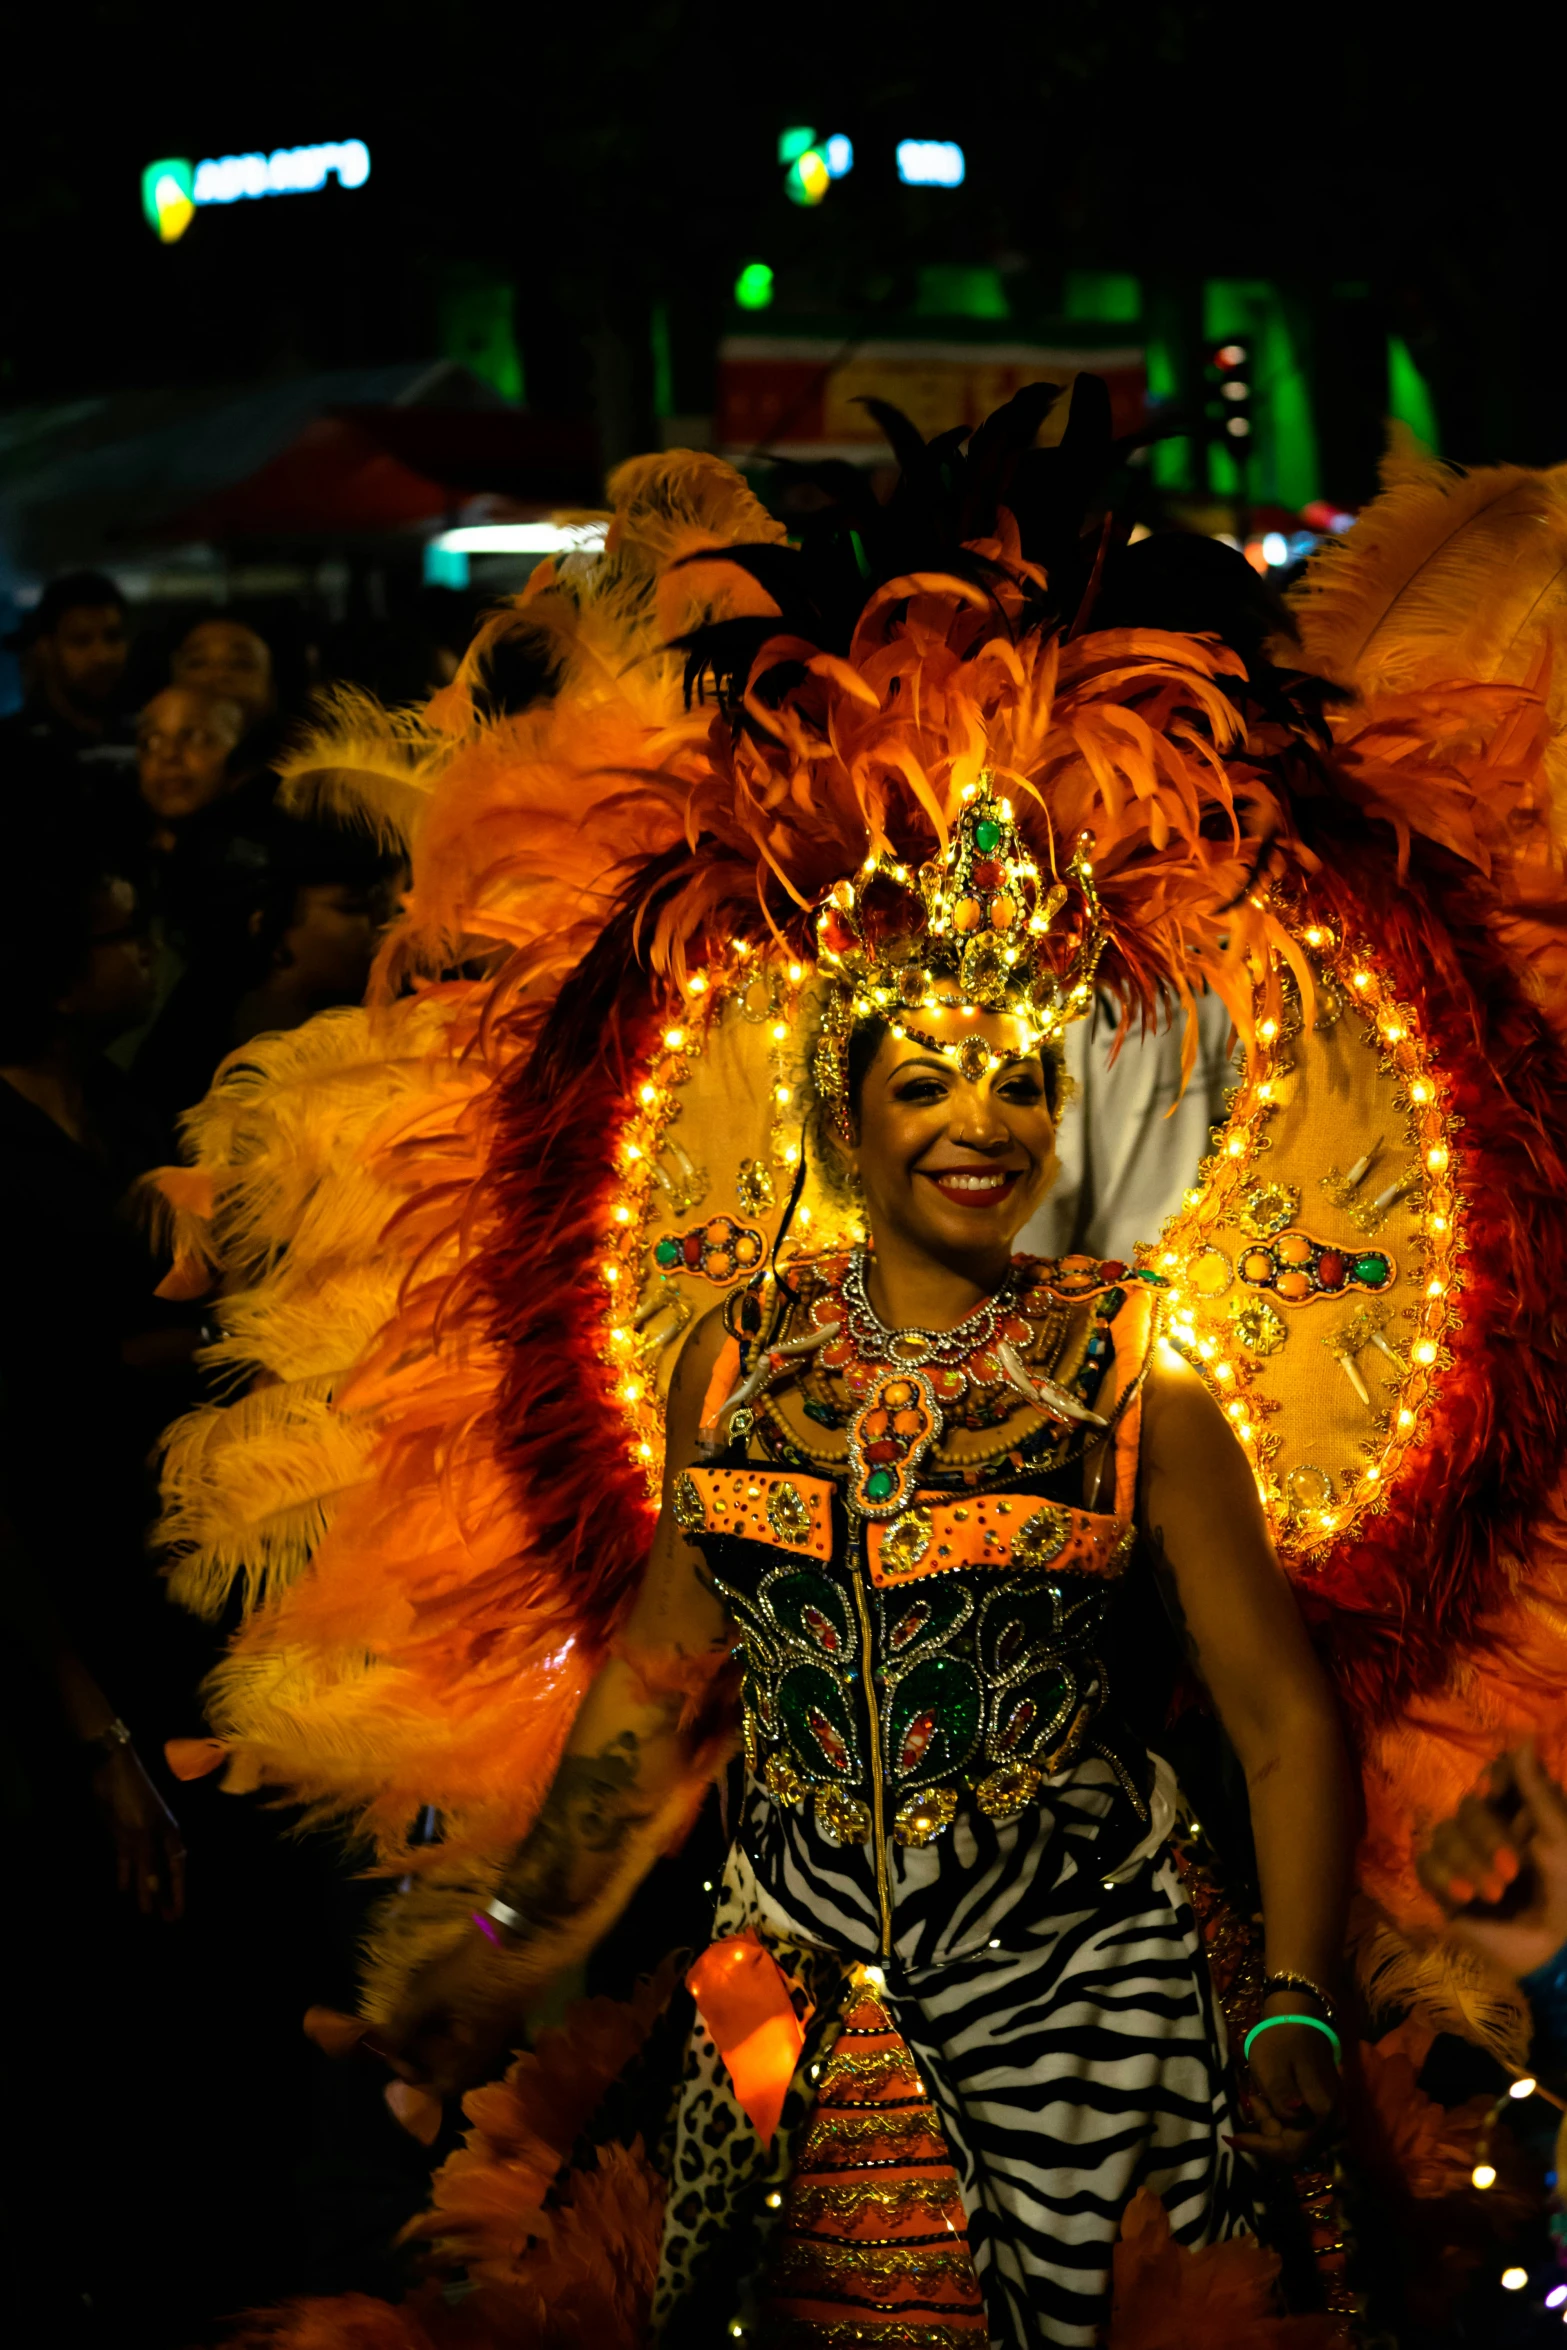 an elaborate woman in costume at the carnival